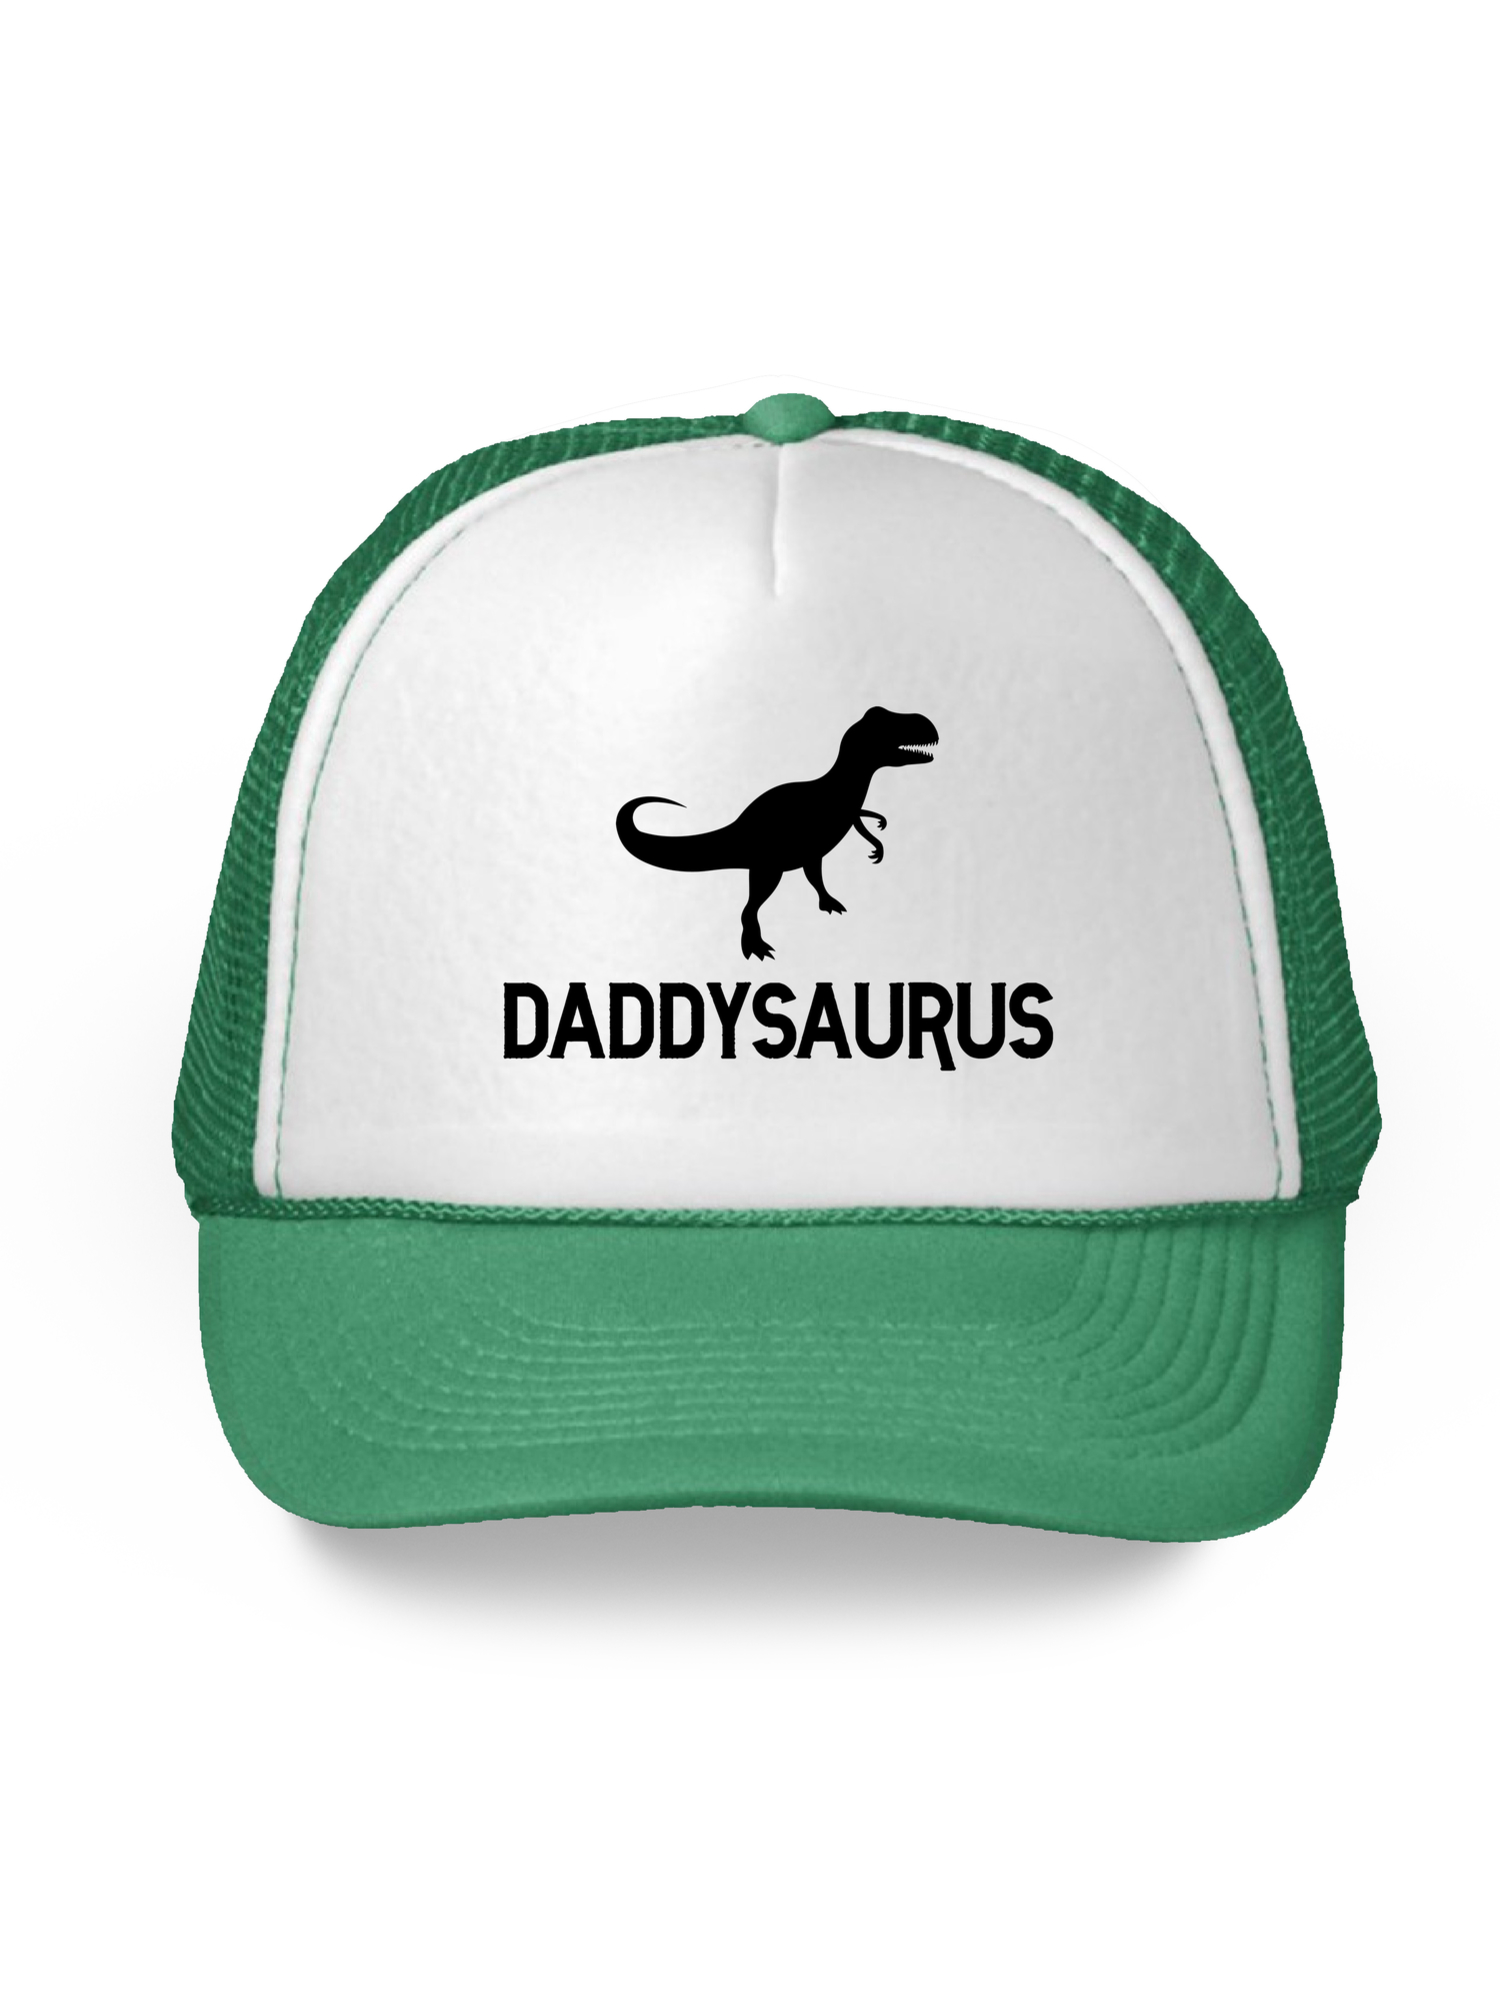 Awkward Styles Gifts for Dad Daddysaurus Hat Dinosaur Dad Trucker Hat Funny Dad Gifts for Father's Day Geek Dad Snapback Hat Hat Accessories for Dad Dinosaur Gifts for Dad Father Trucker Hat Daddy Cap - image 1 of 6